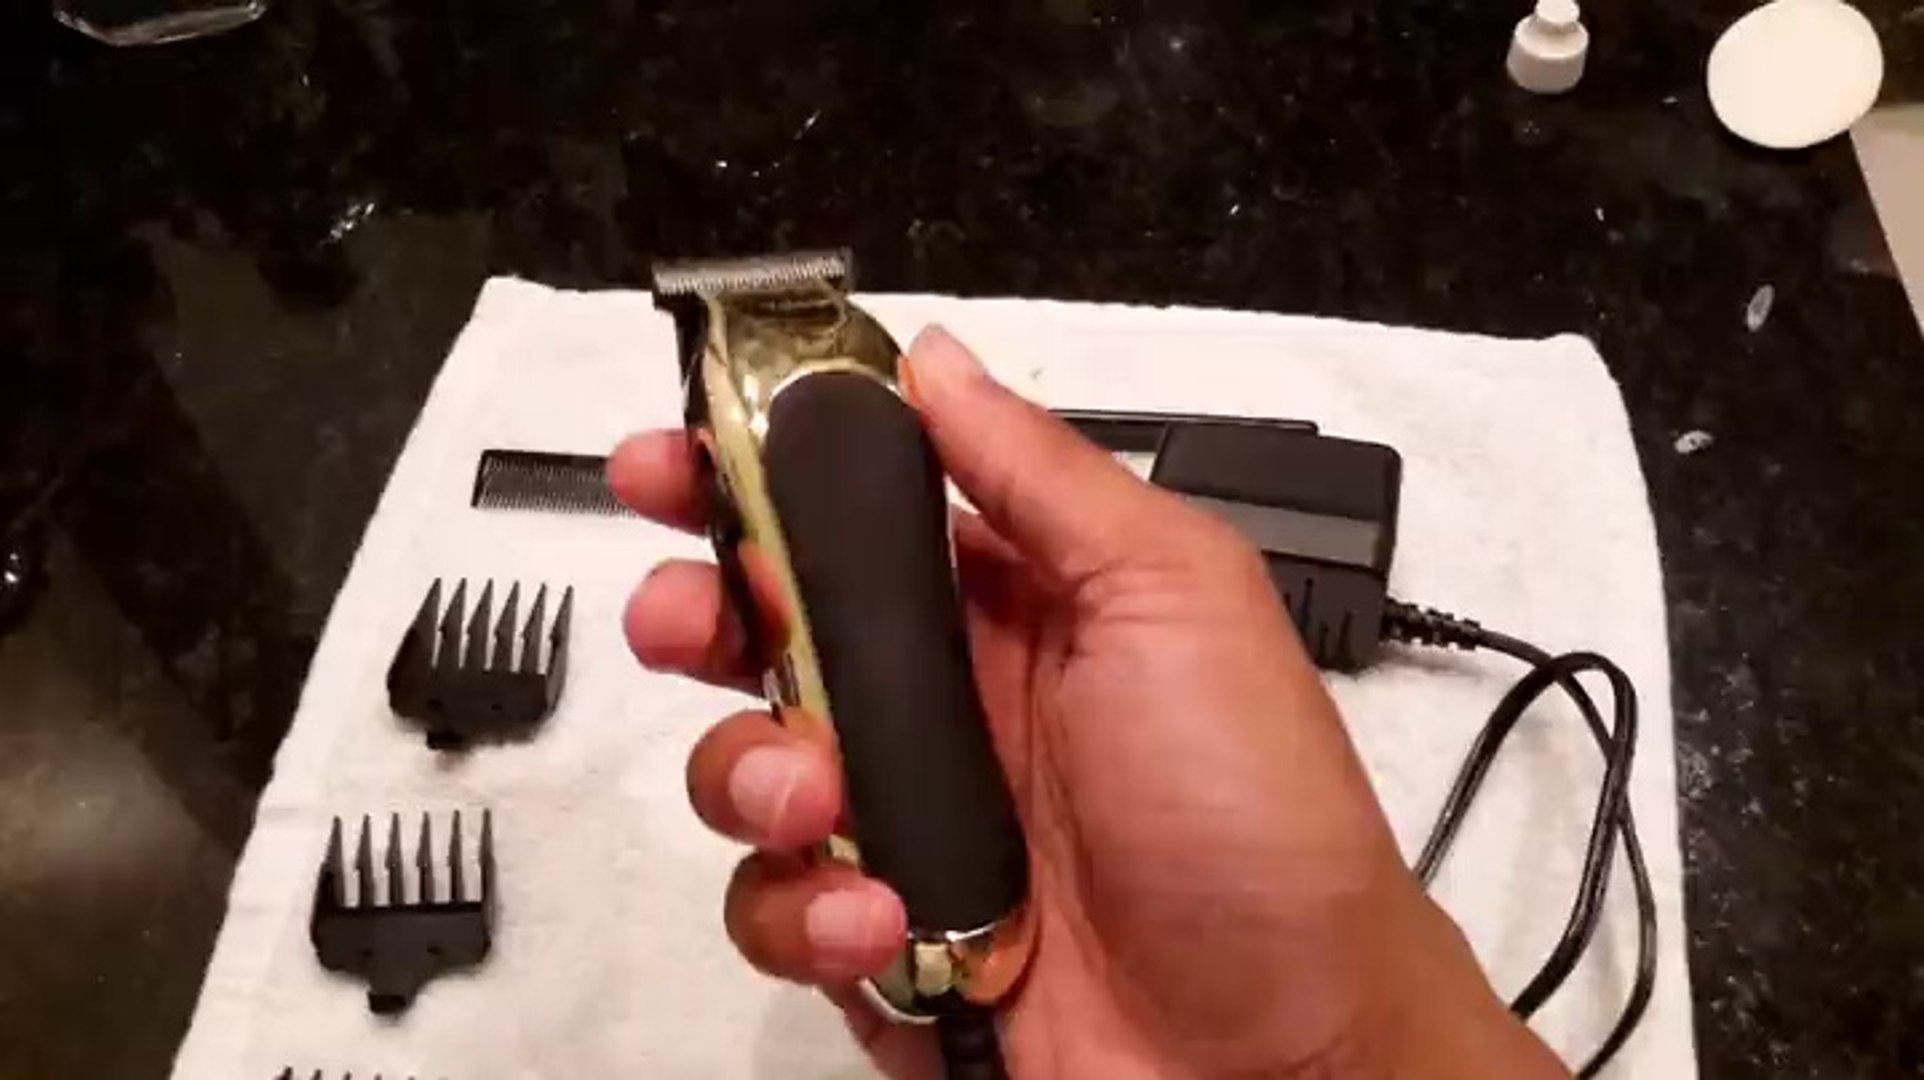 wahl t styler gold